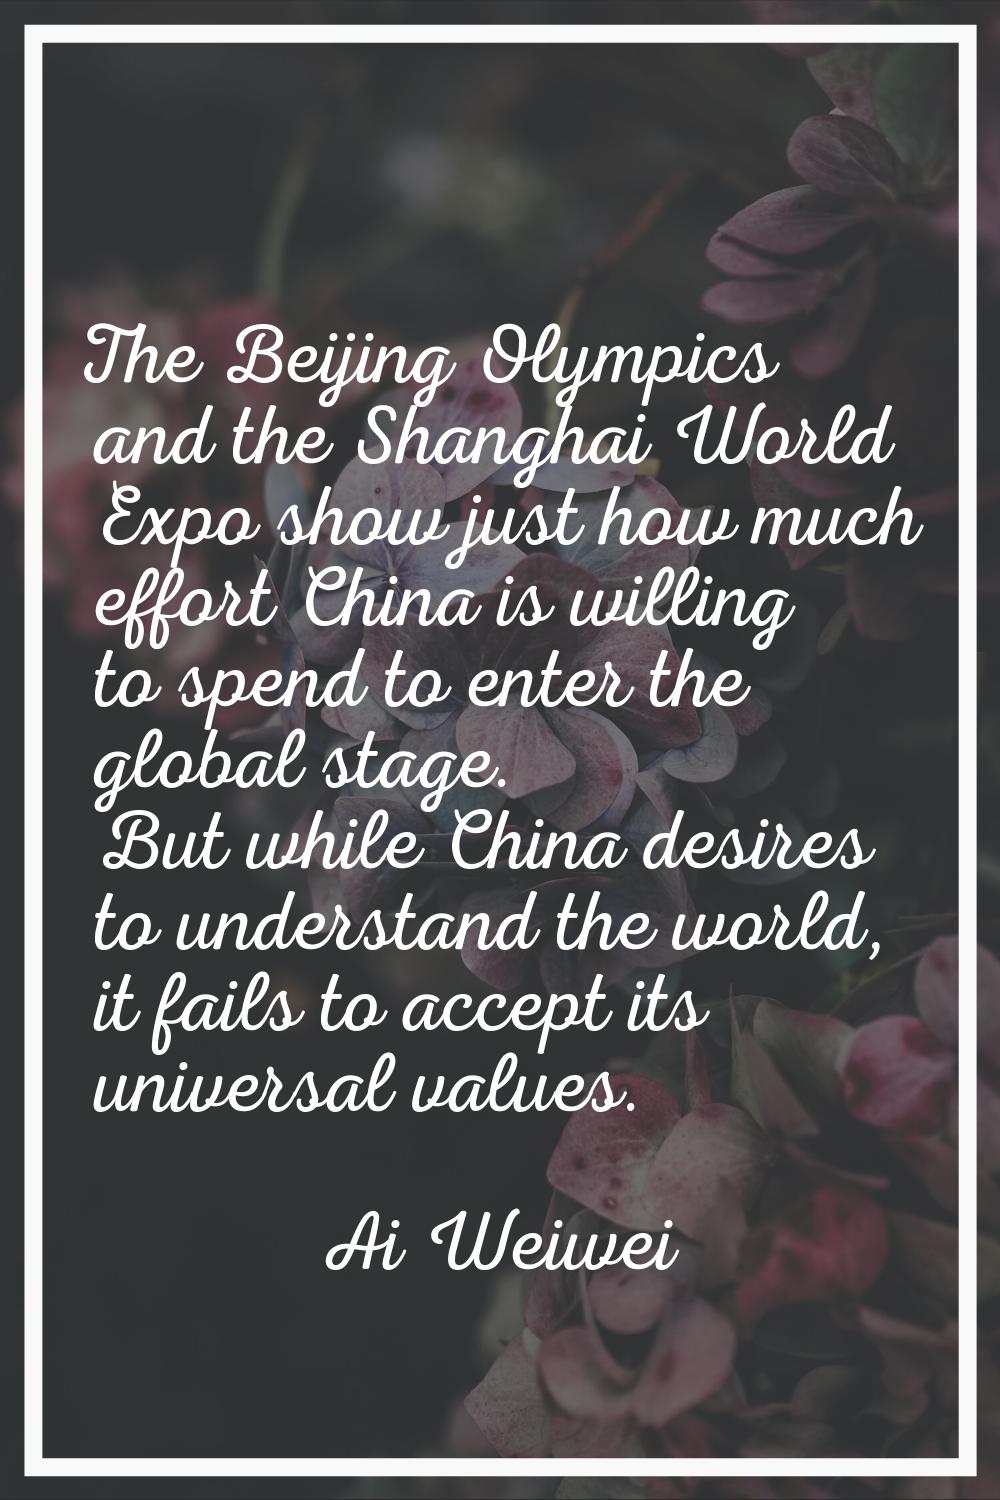 The Beijing Olympics and the Shanghai World Expo show just how much effort China is willing to spen